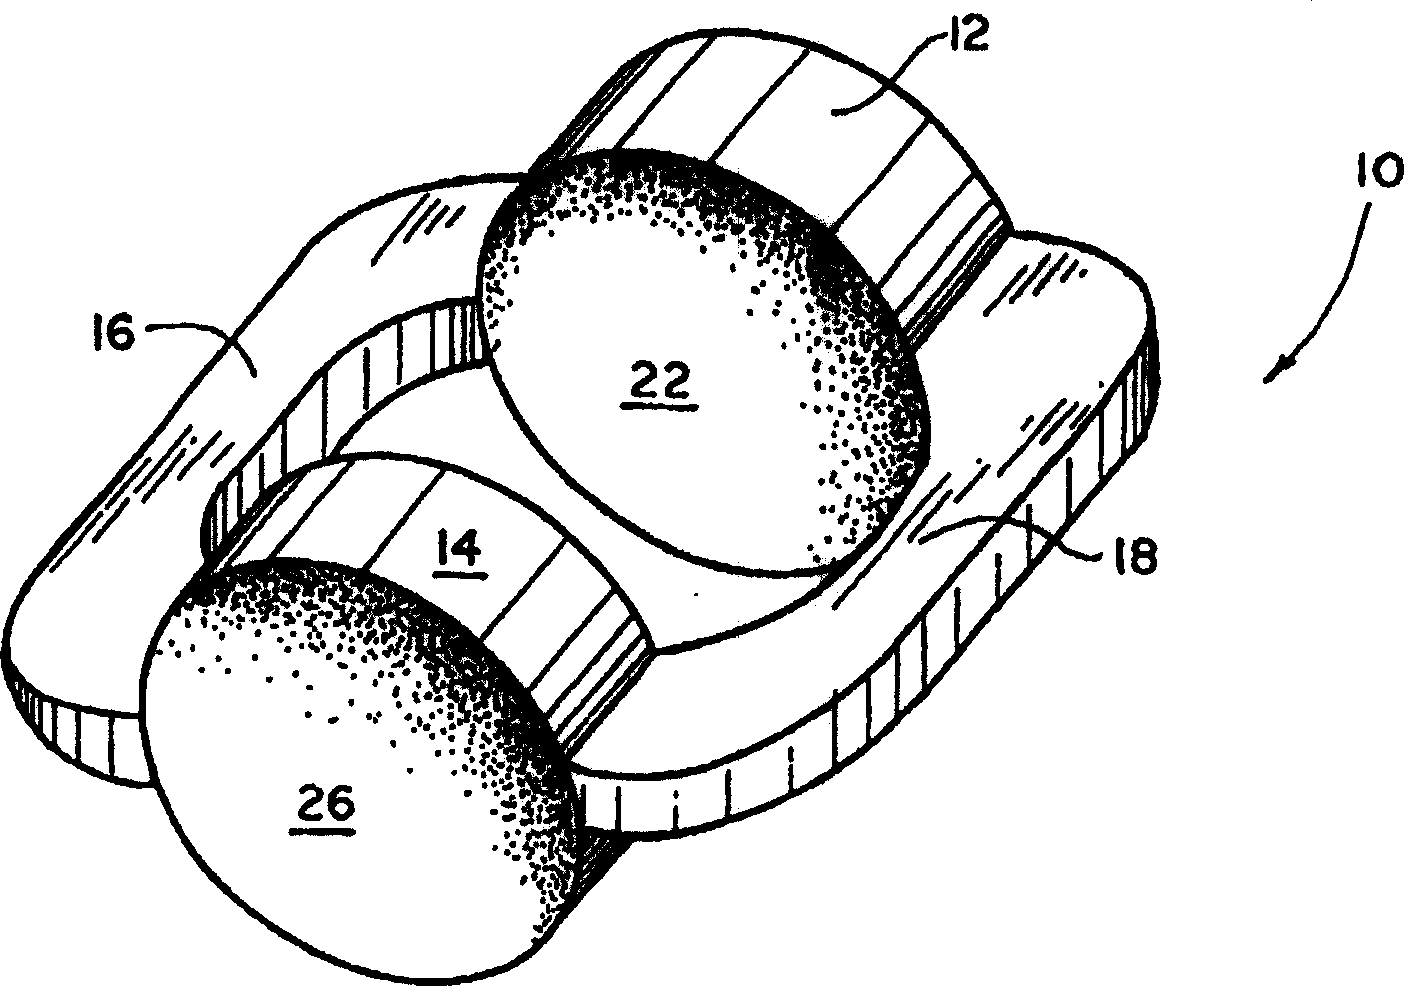 Segmented ball/roller guide for a linear motion bearing